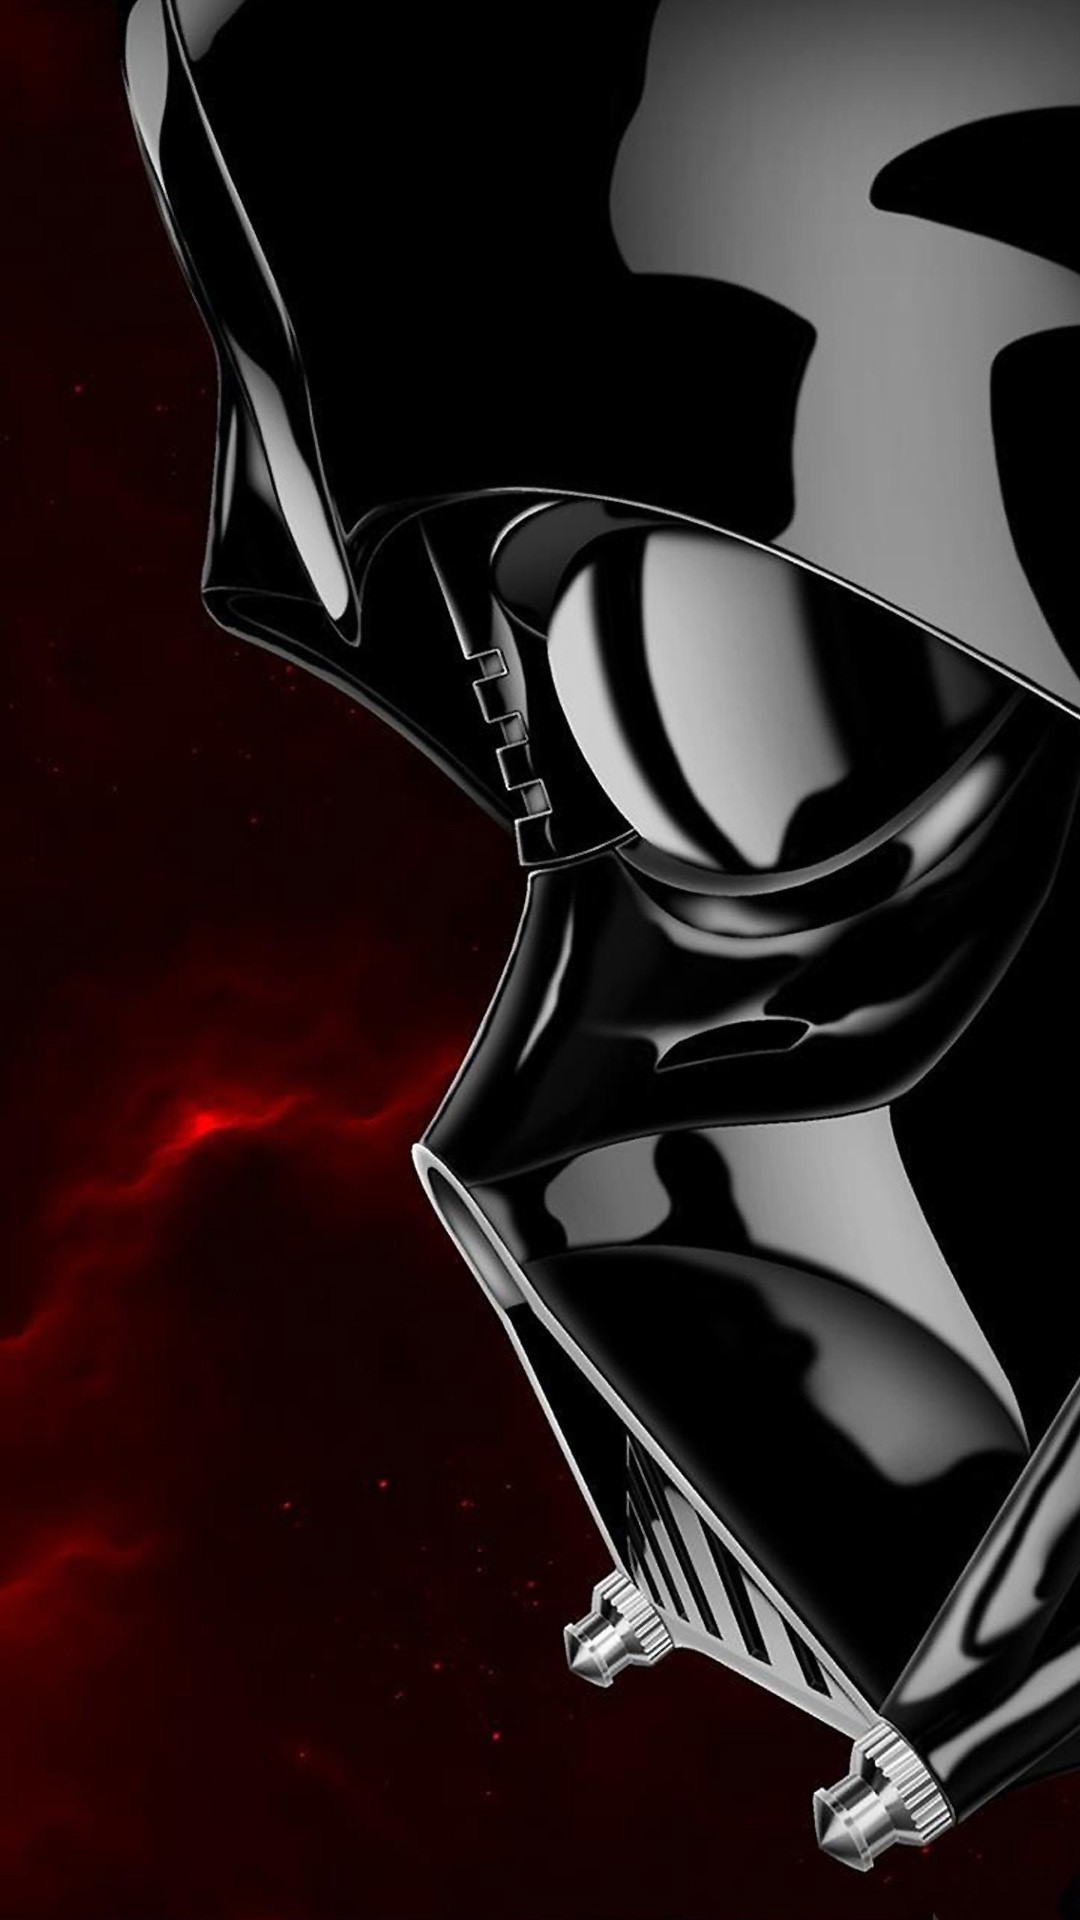 Star Wars Live Wallpaper Android Image